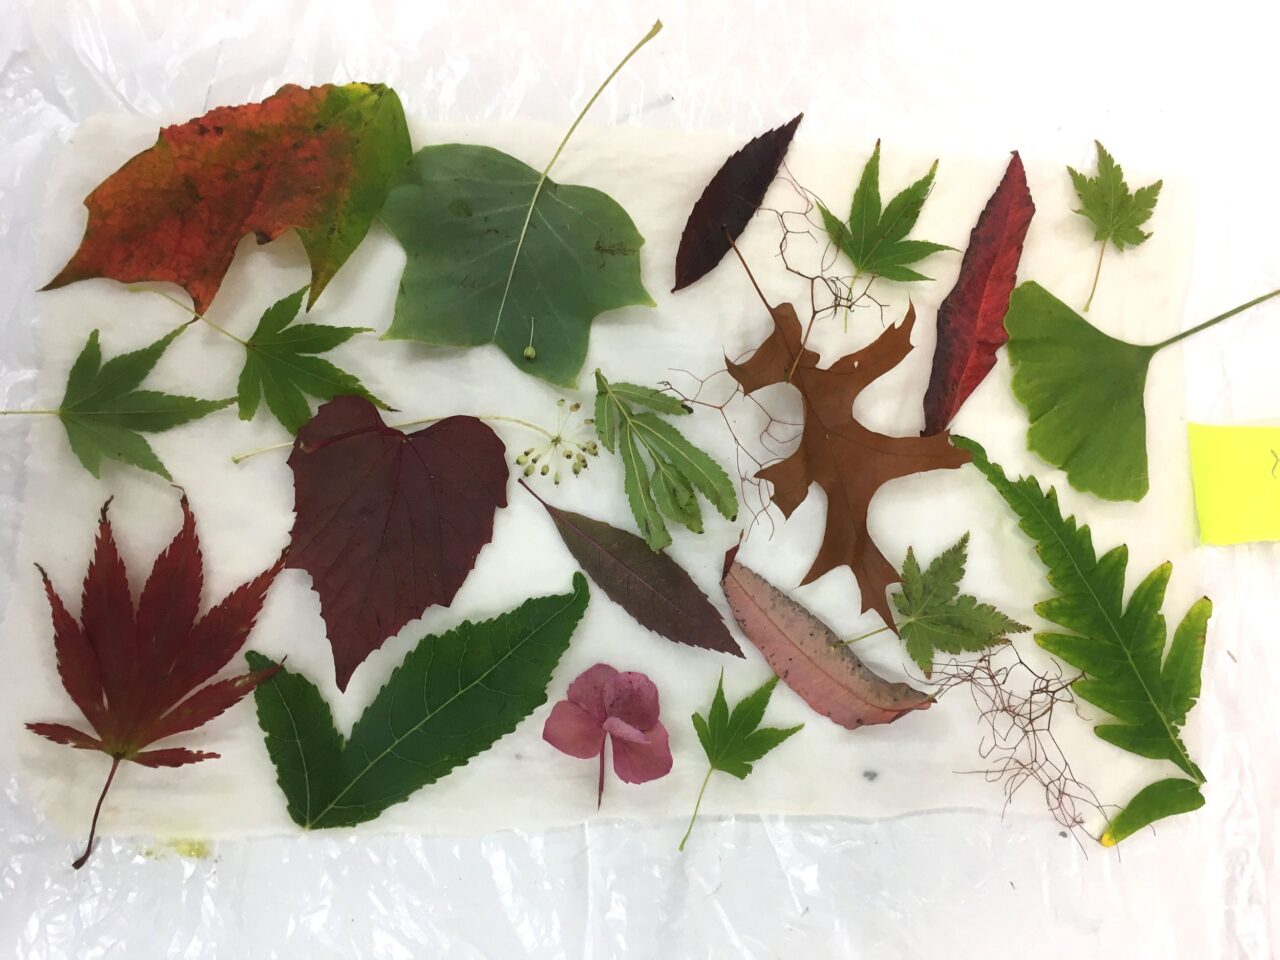 Leaves on paper in preparation for eco-printing workshop